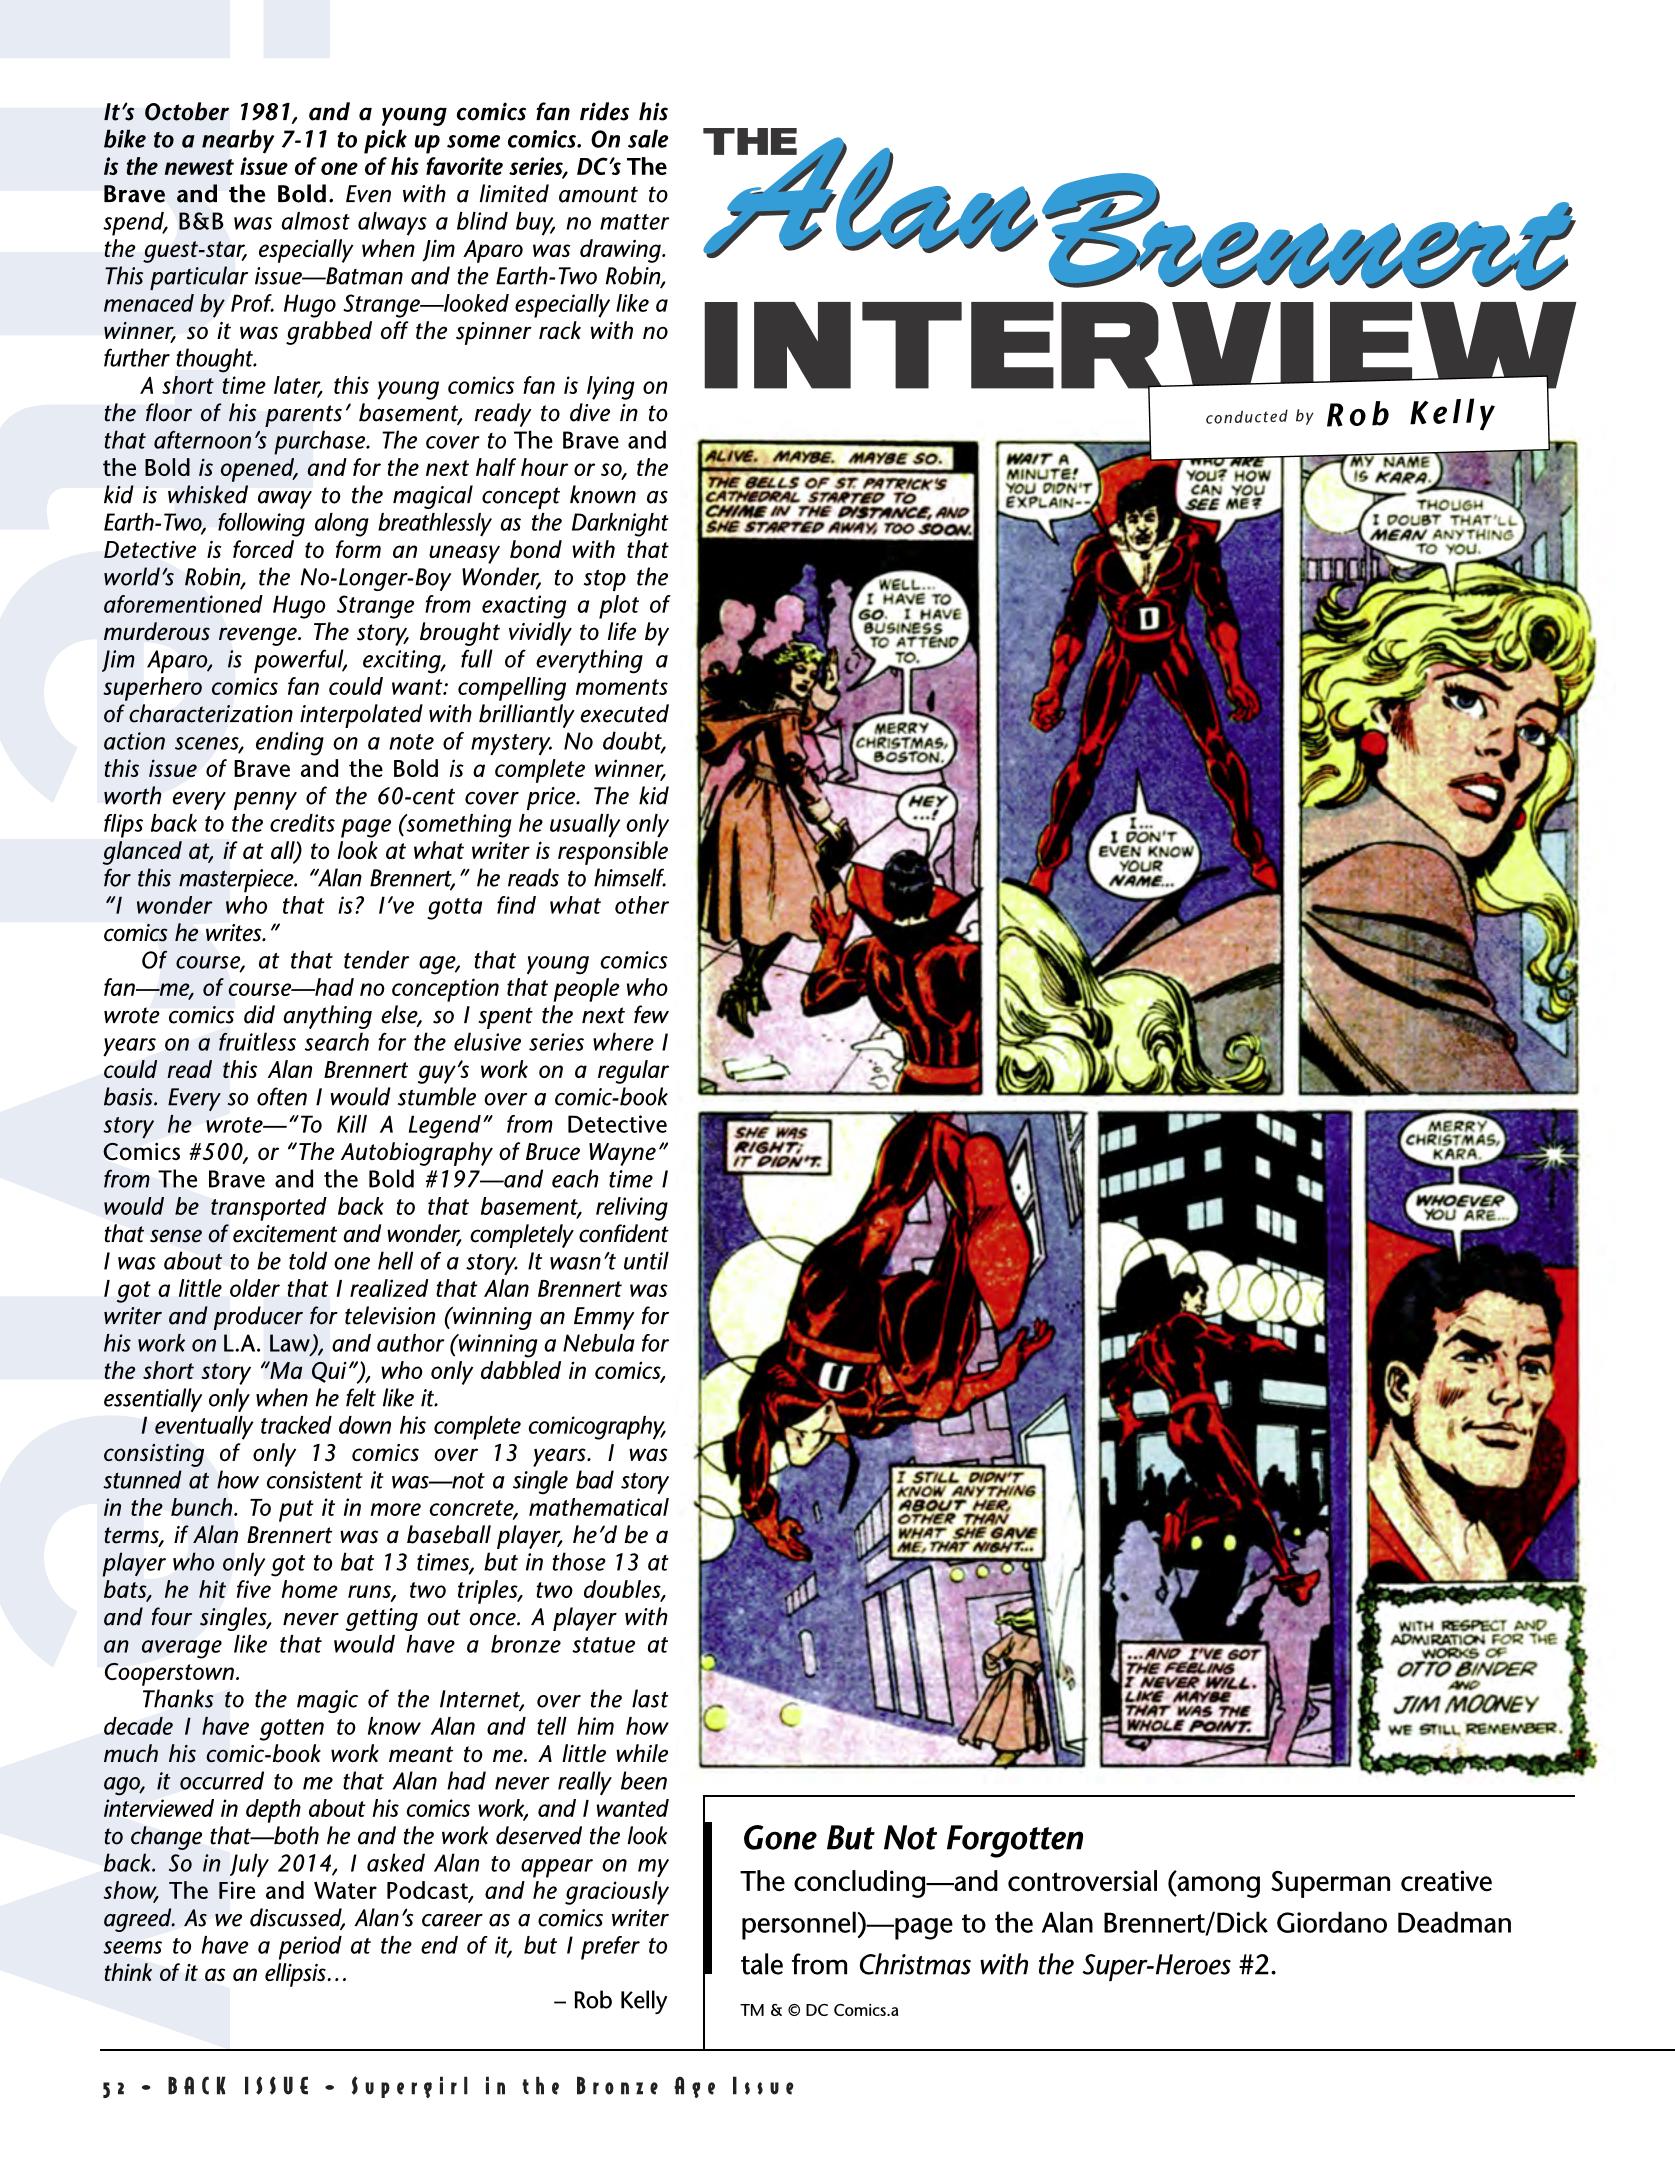 Read online Back Issue comic -  Issue #84 - 50